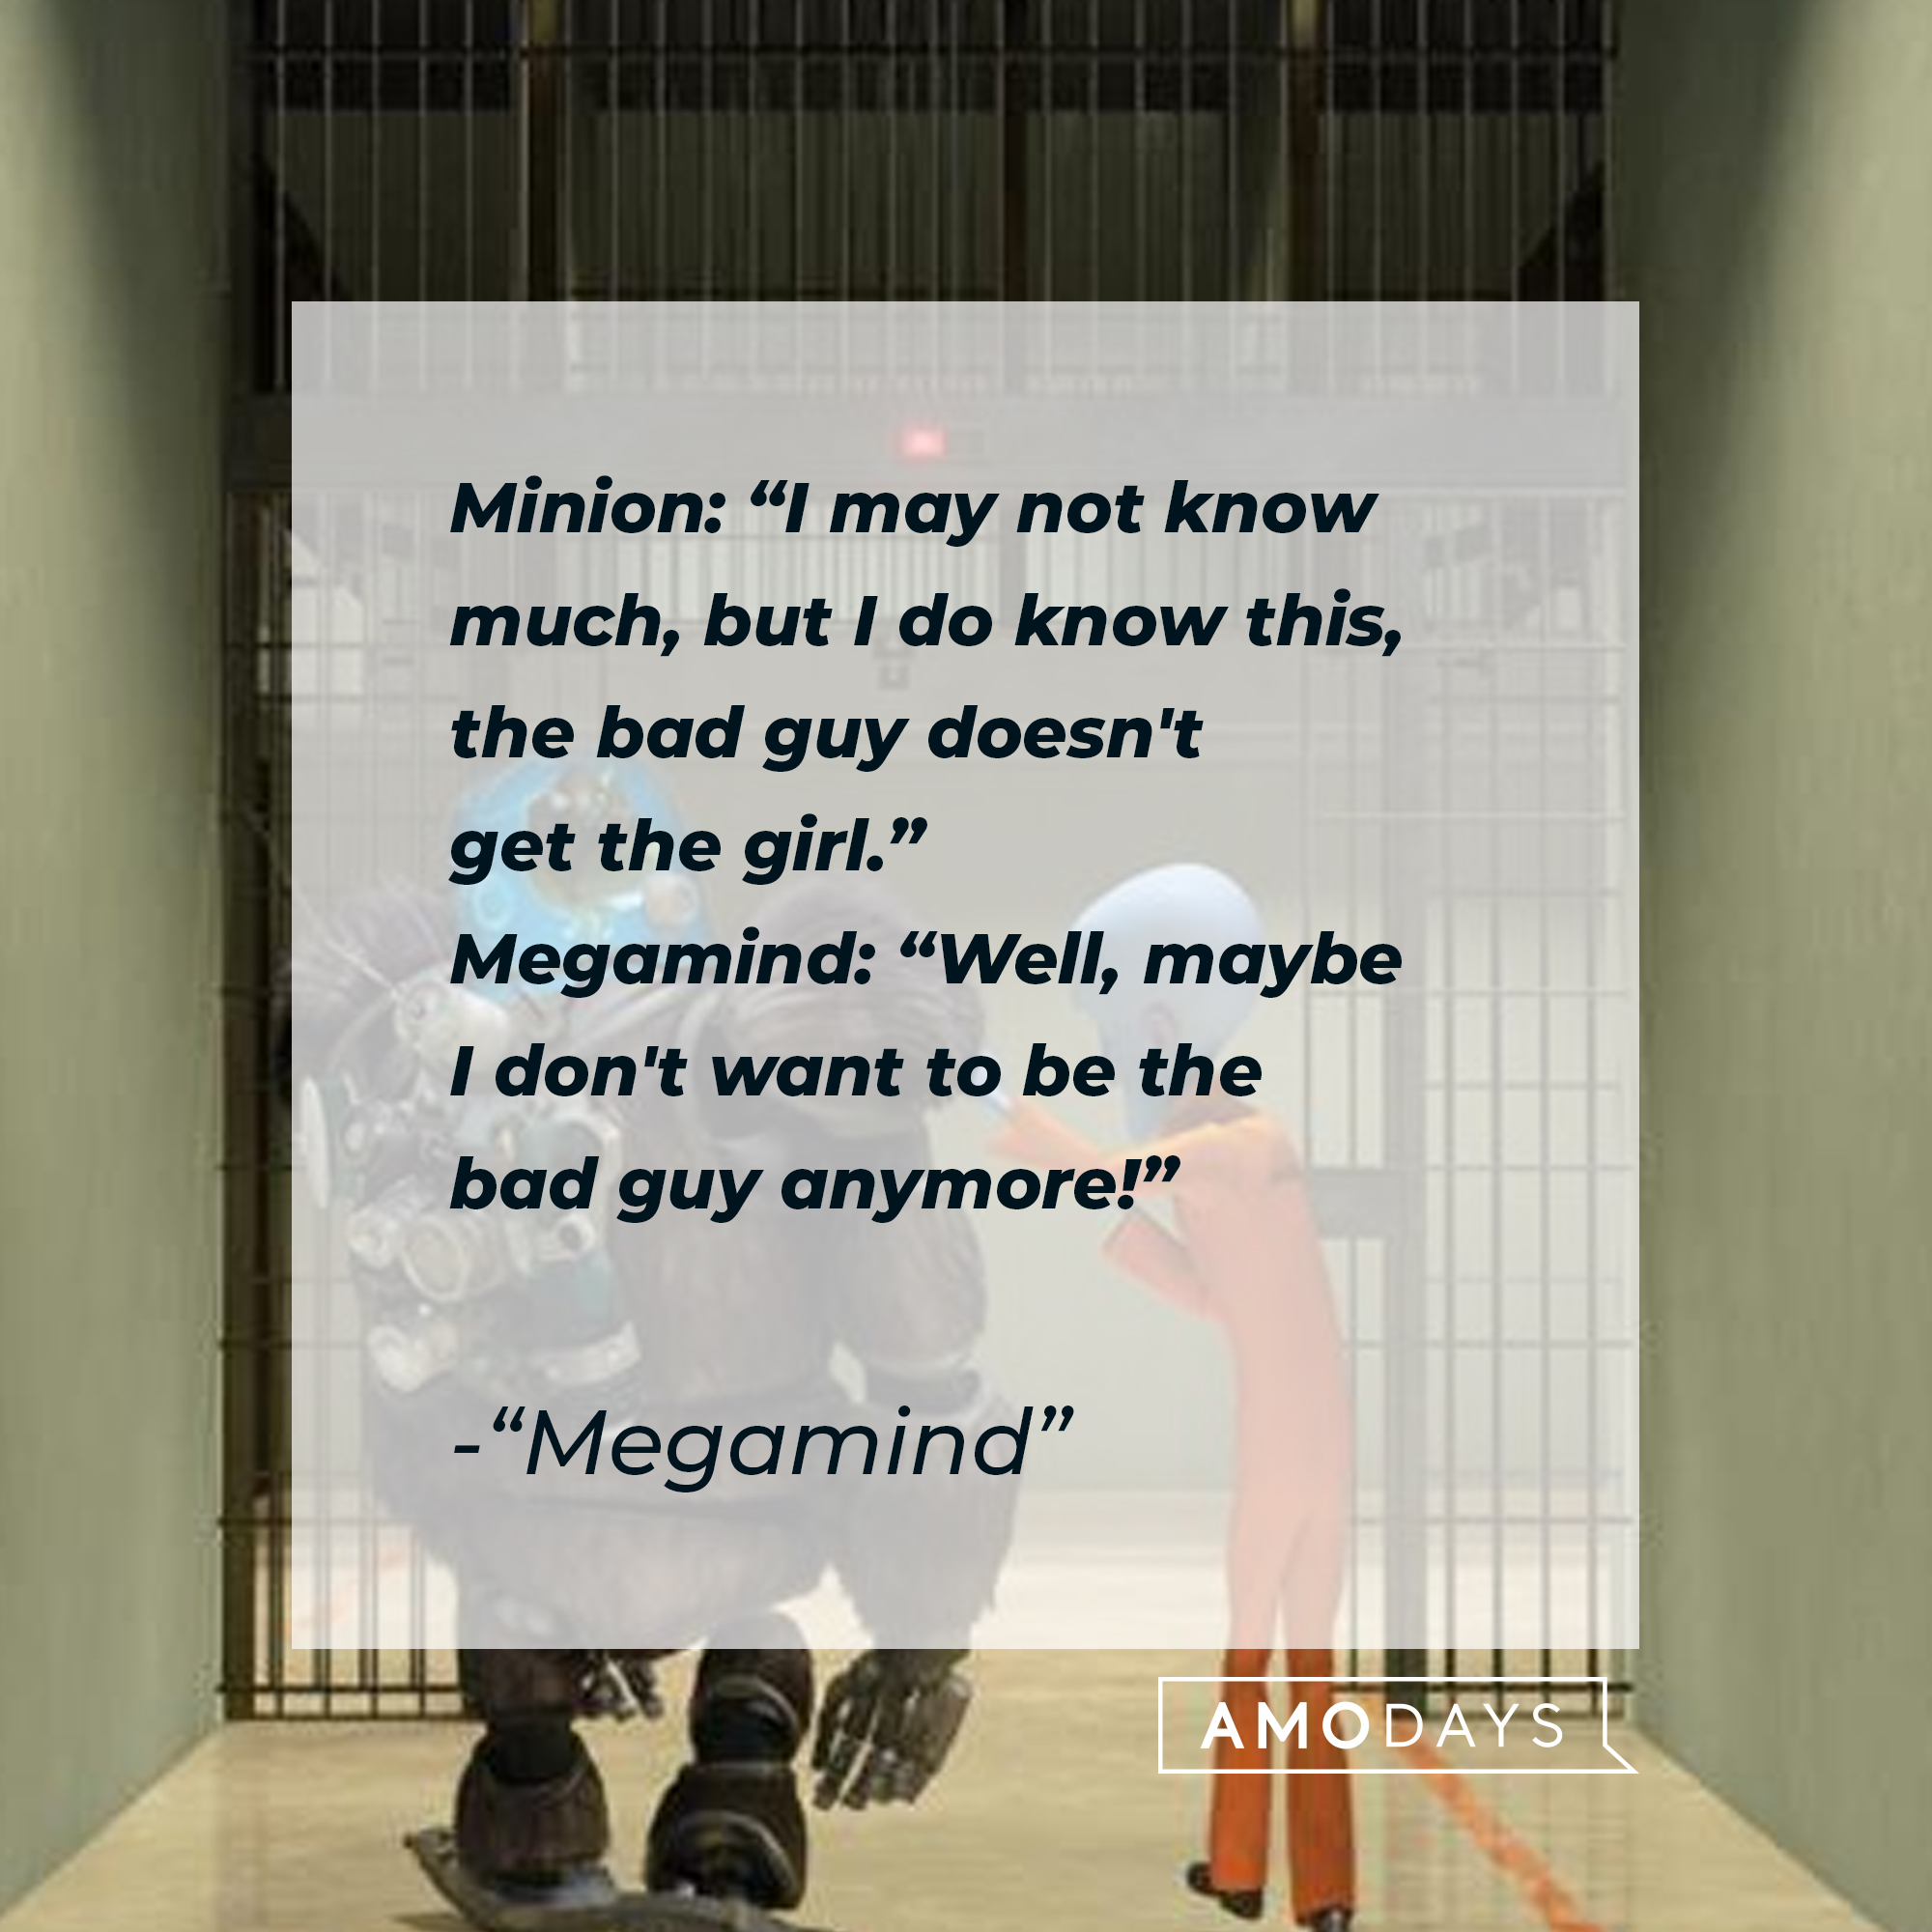 "Megamind's" quote: Minion: "I may not know much, but I do know this, the bad guy doesn't get the girl." / Megamind: "Well, maybe I don't want to be the bad guy anymore!" | Source: Facebook.com/MegamindUK